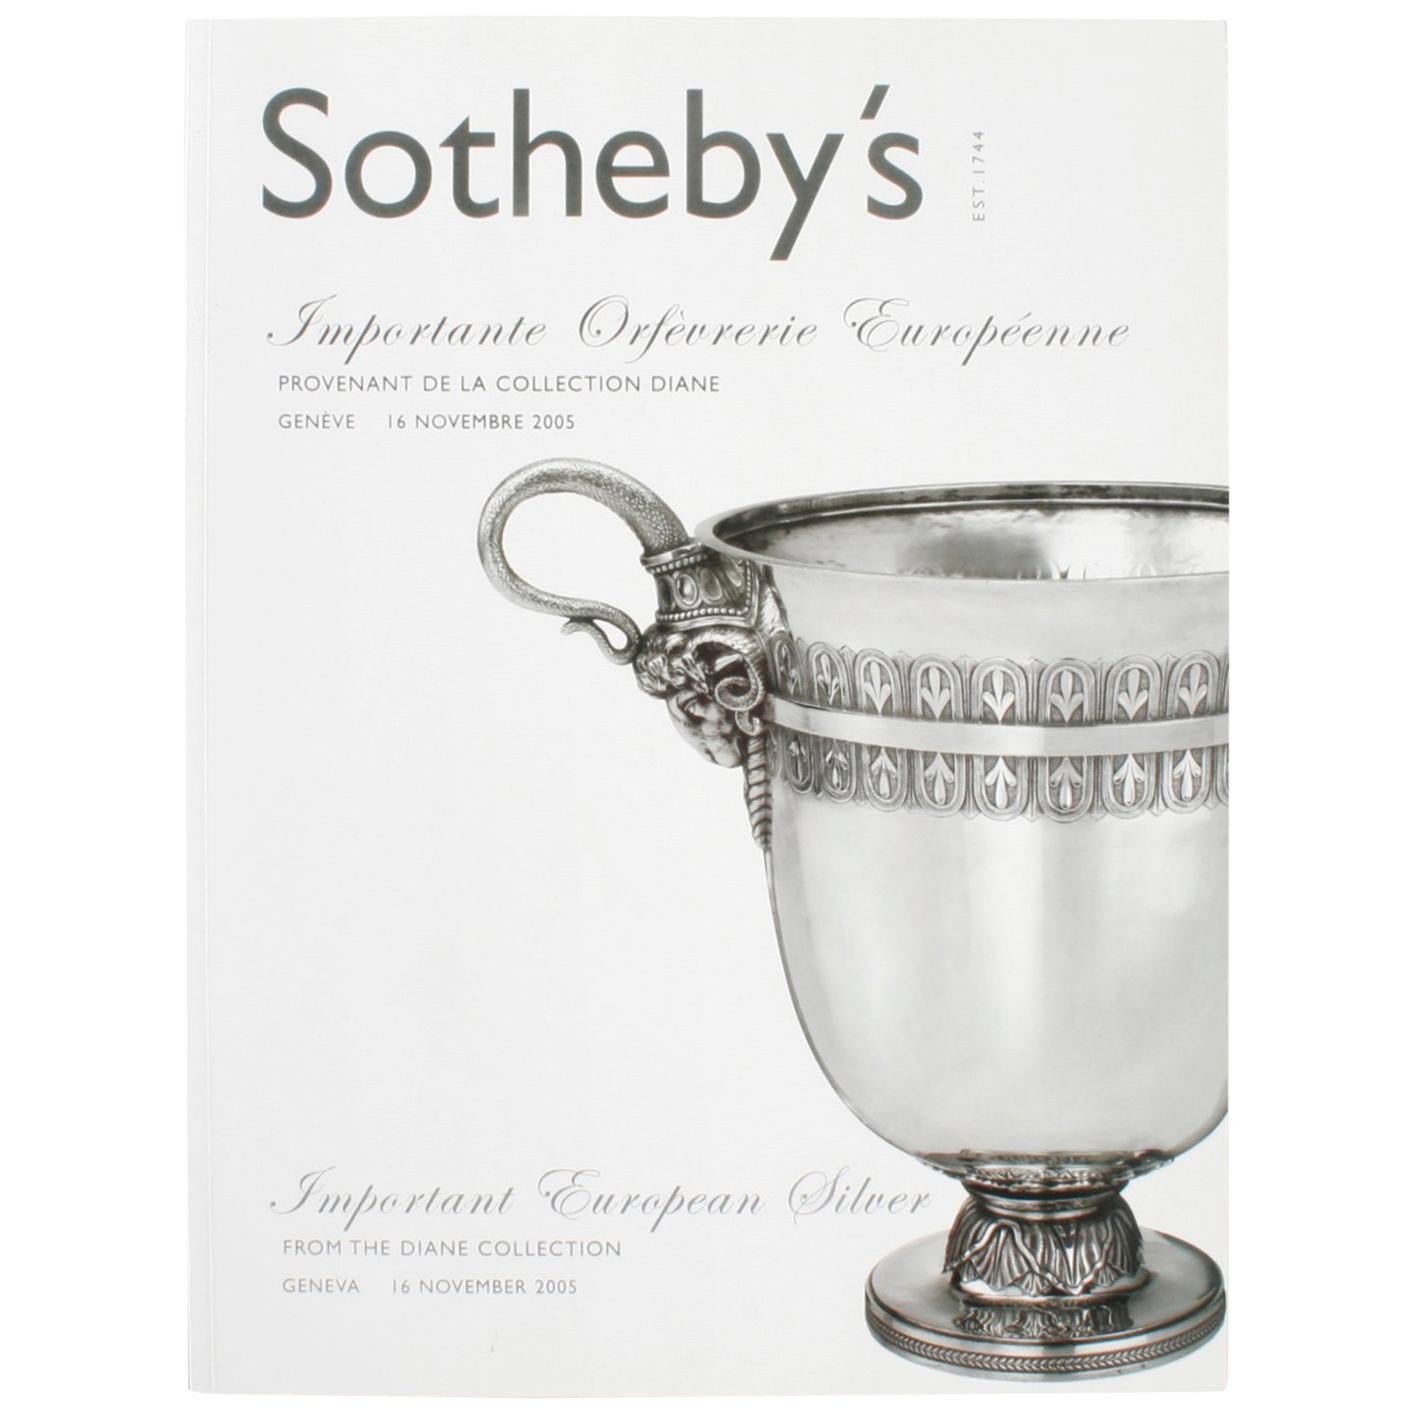 "Sotheby's Geneva, Important European Silver From the Diane Collection", Book